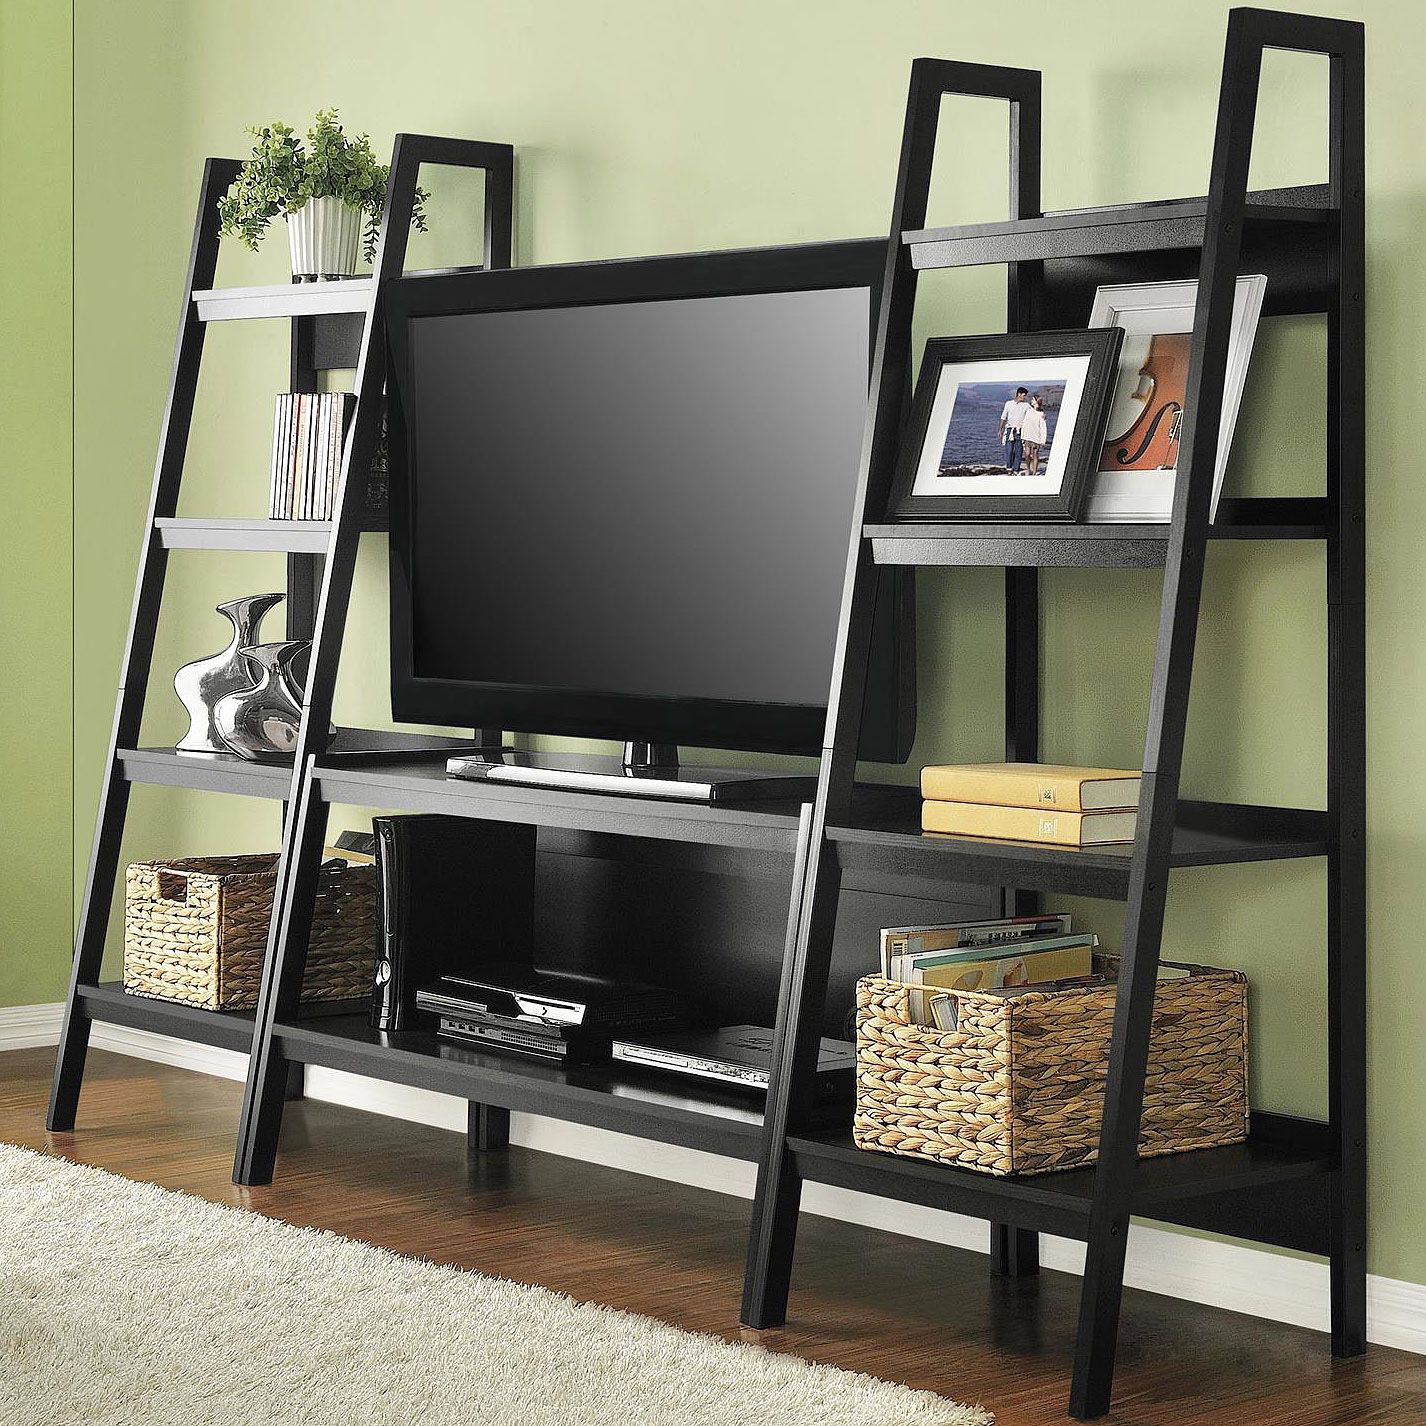 TV Stand with Bookshelves